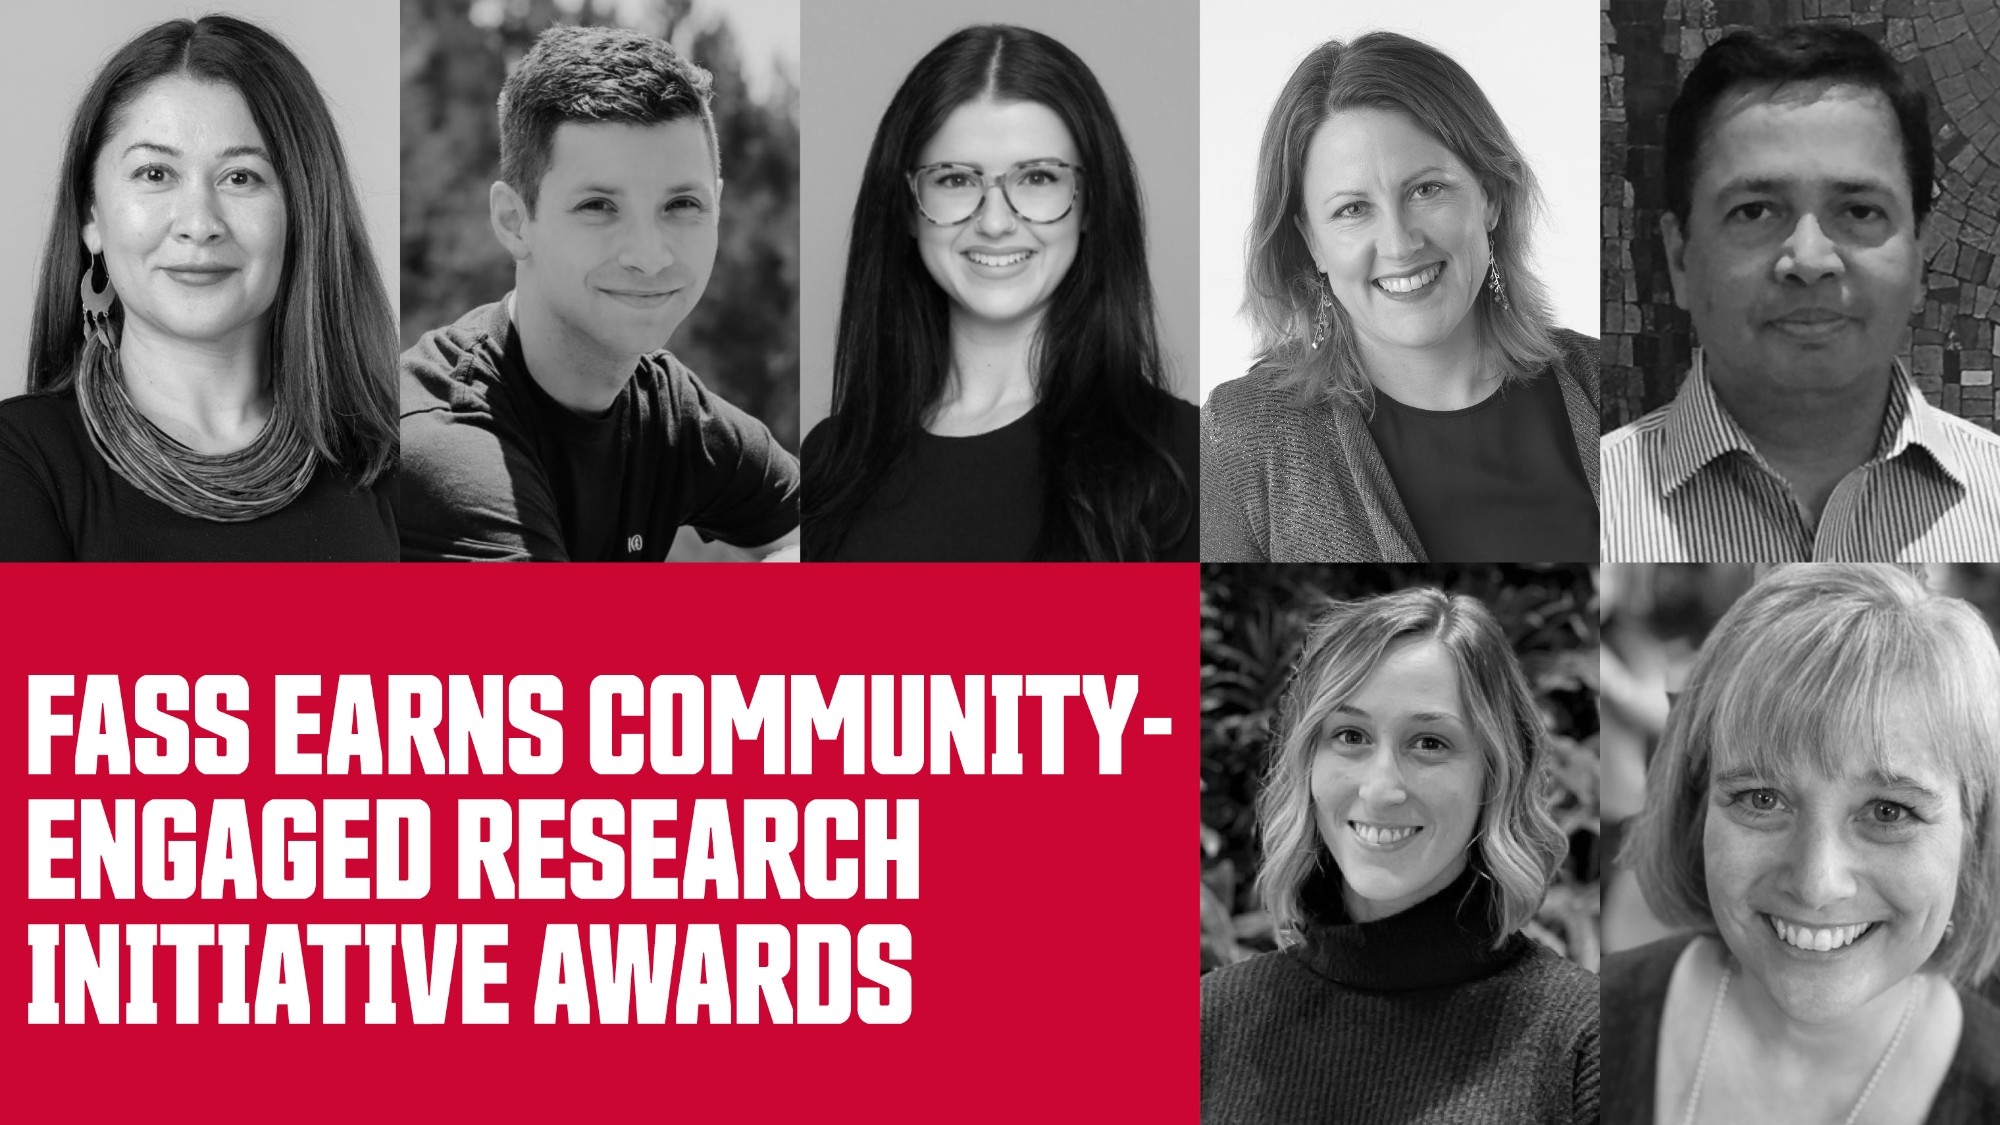 To the left of the image is a red block with white text that reads: FASS EARNS COMMUNITY-ENGAGED RESEARCH INITIATIVE AWARDS. To the right are seven black and white images of the award winners as noted in the image description below.